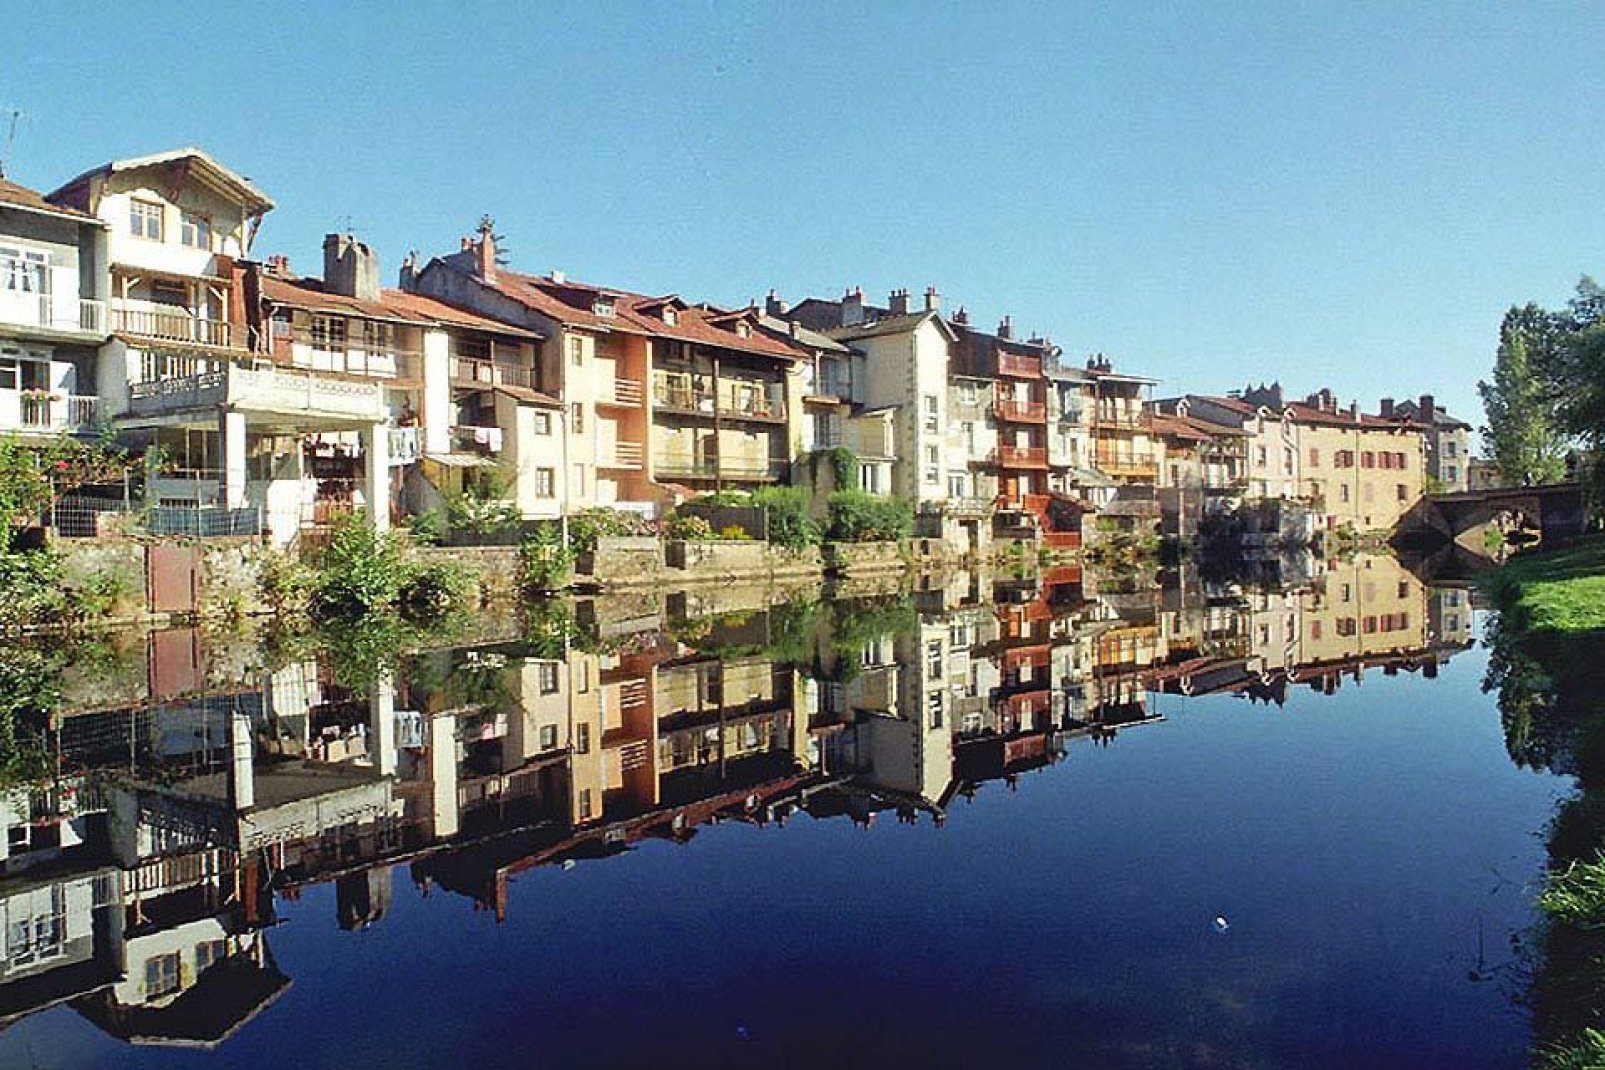 During a stay in Aurillac, you cannot help but notice the charming buildings which seem to watch over the Jordanne river.